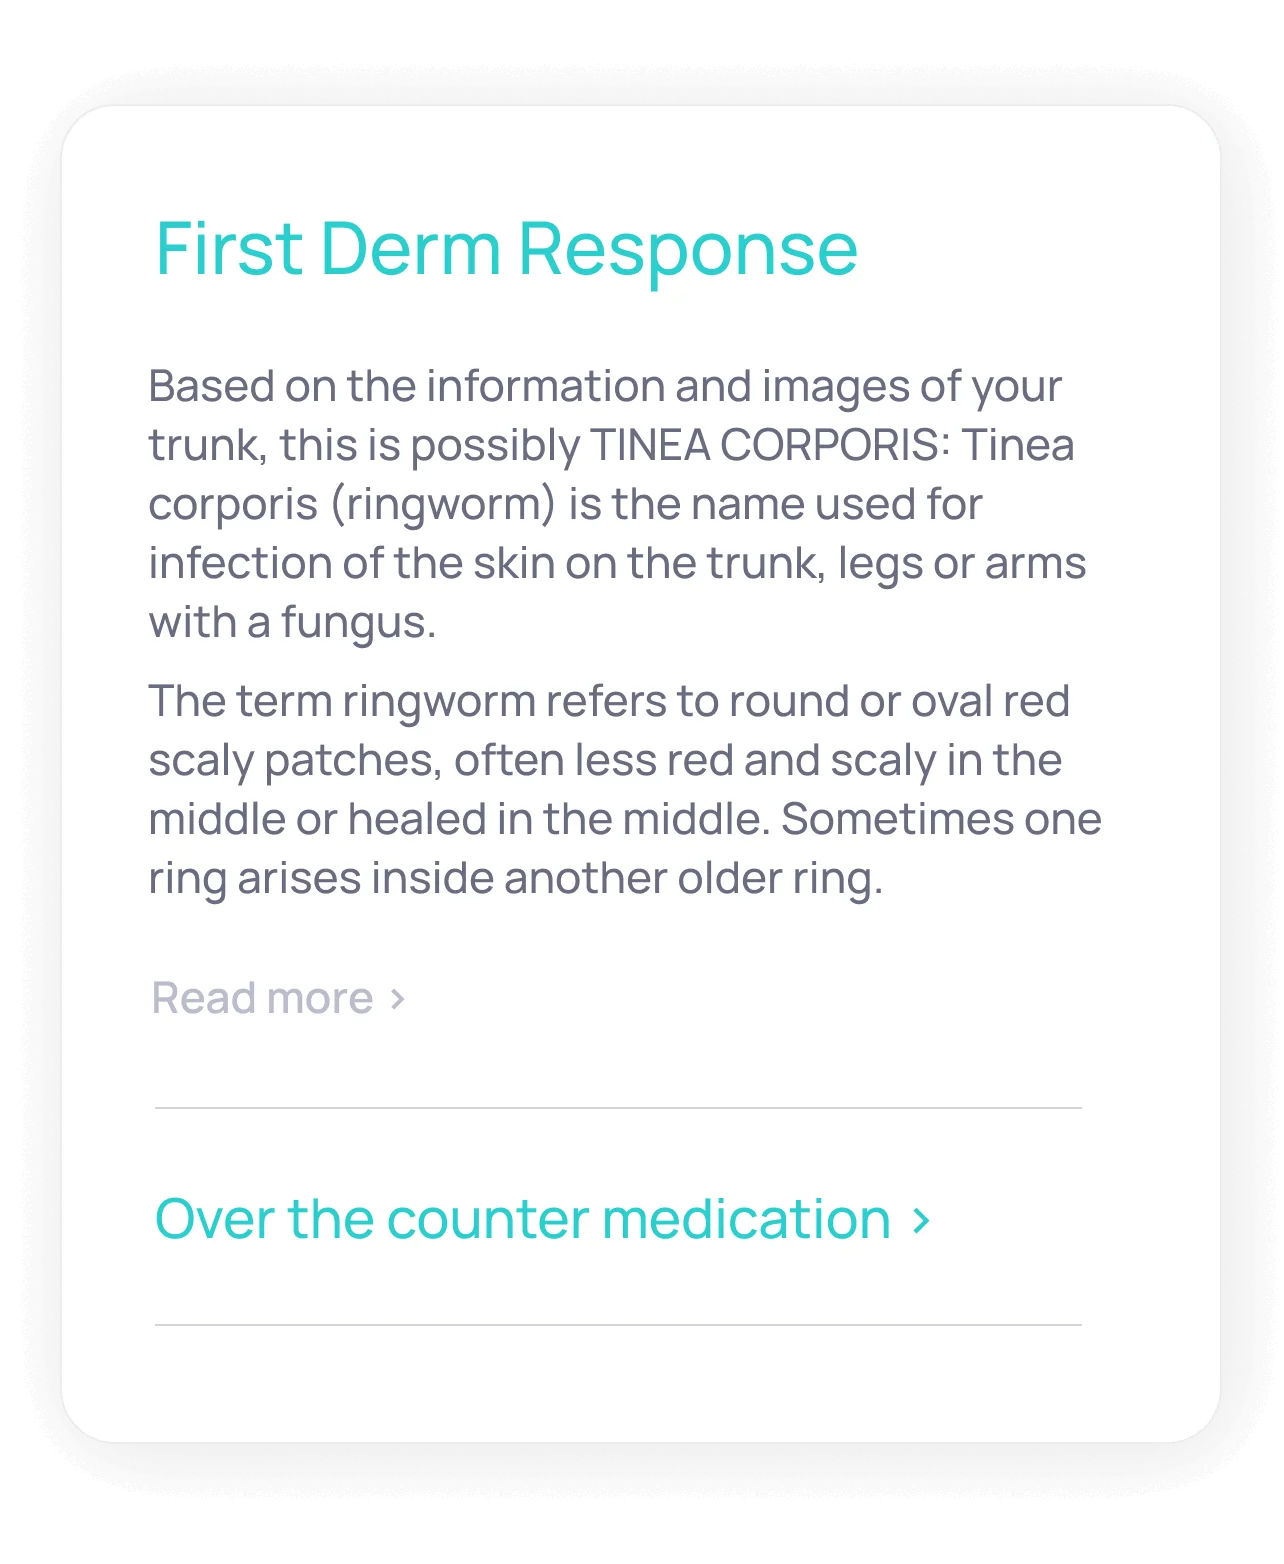 online dermatology consultation includes the likely skin condition - instructions on what to do next<br />
- over-the-counter medication</p>
<p>